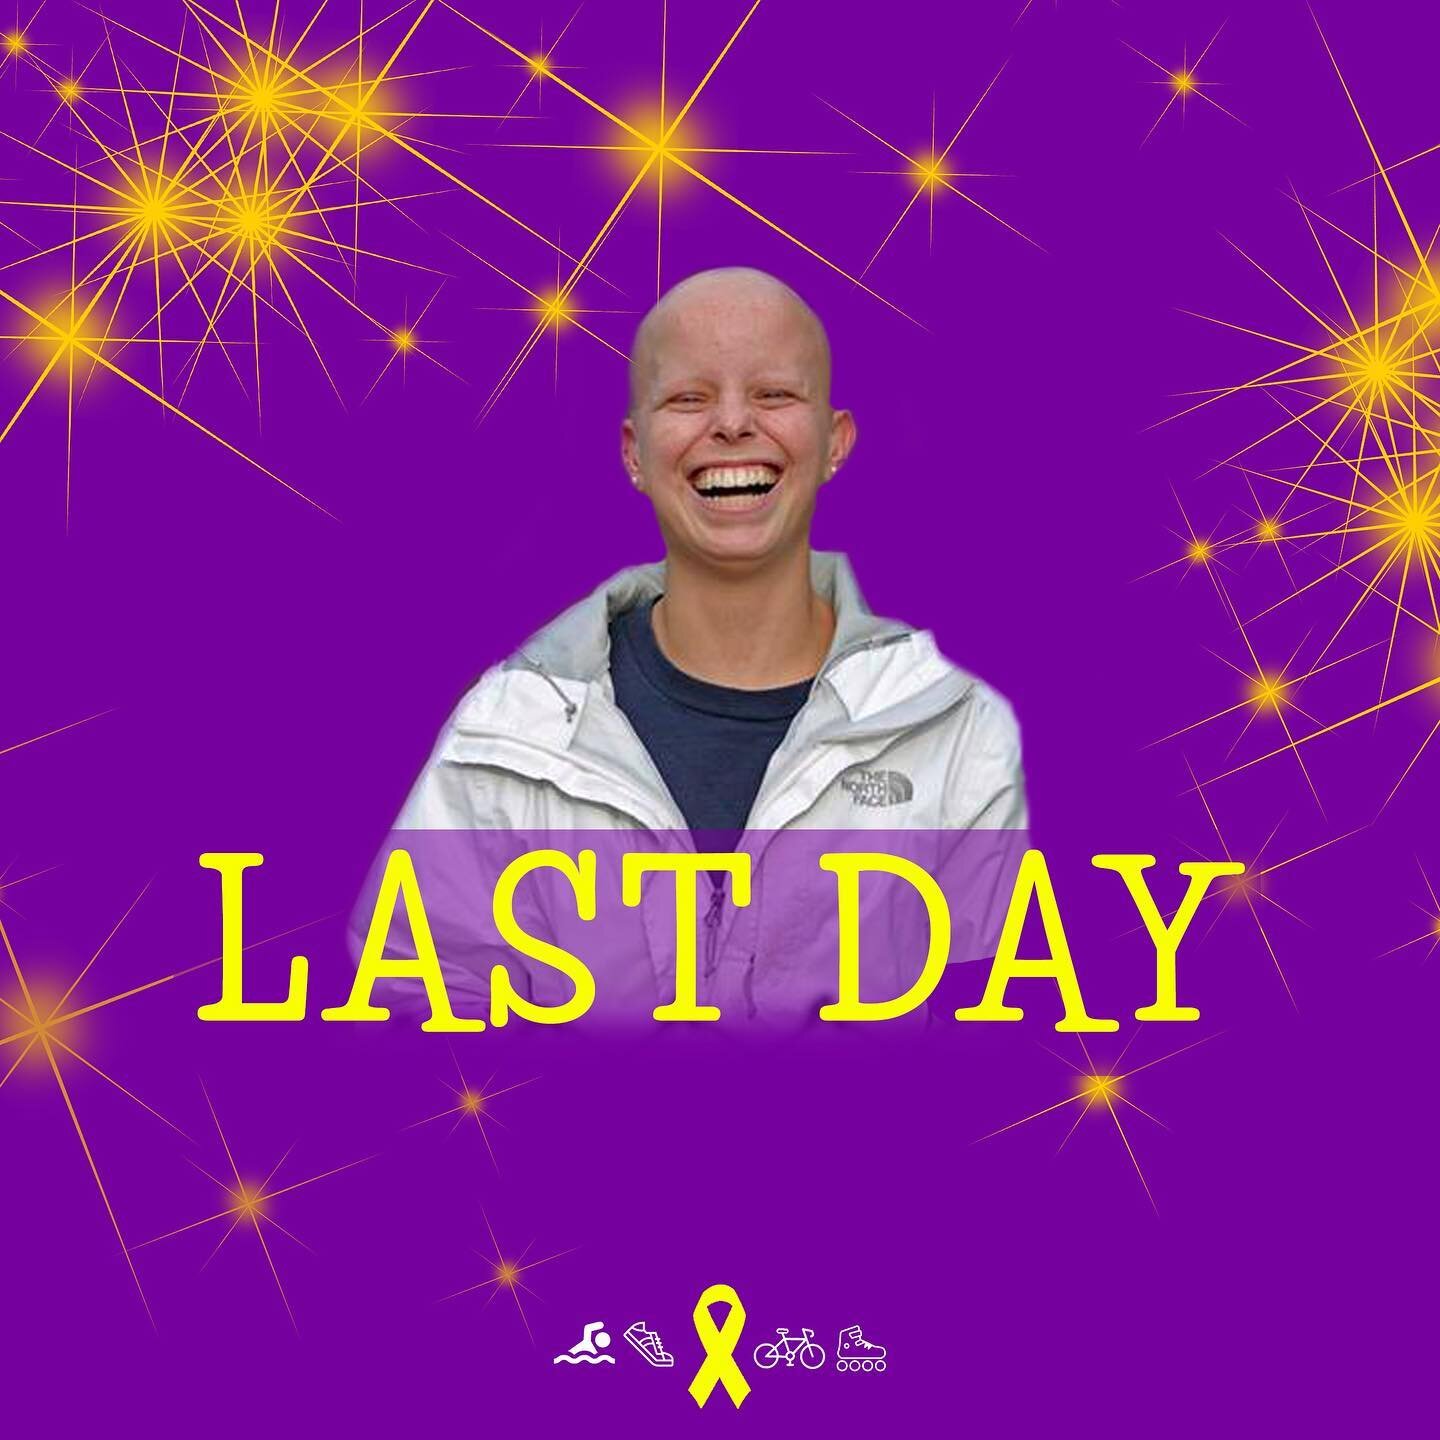 LAST DAY TO REGISTER FOR THE MILES FOR SMILES VIRTUAL CHALLENGE🏃🏻&zwj;♀️🚴🏼&zwj;♂️🏊🏼&zwj;♂️🏌️&zwj;♂️

Any activity you want, any distance you want!! One great weekend!!

Link in bio to register💜💛 #KeepSmiling